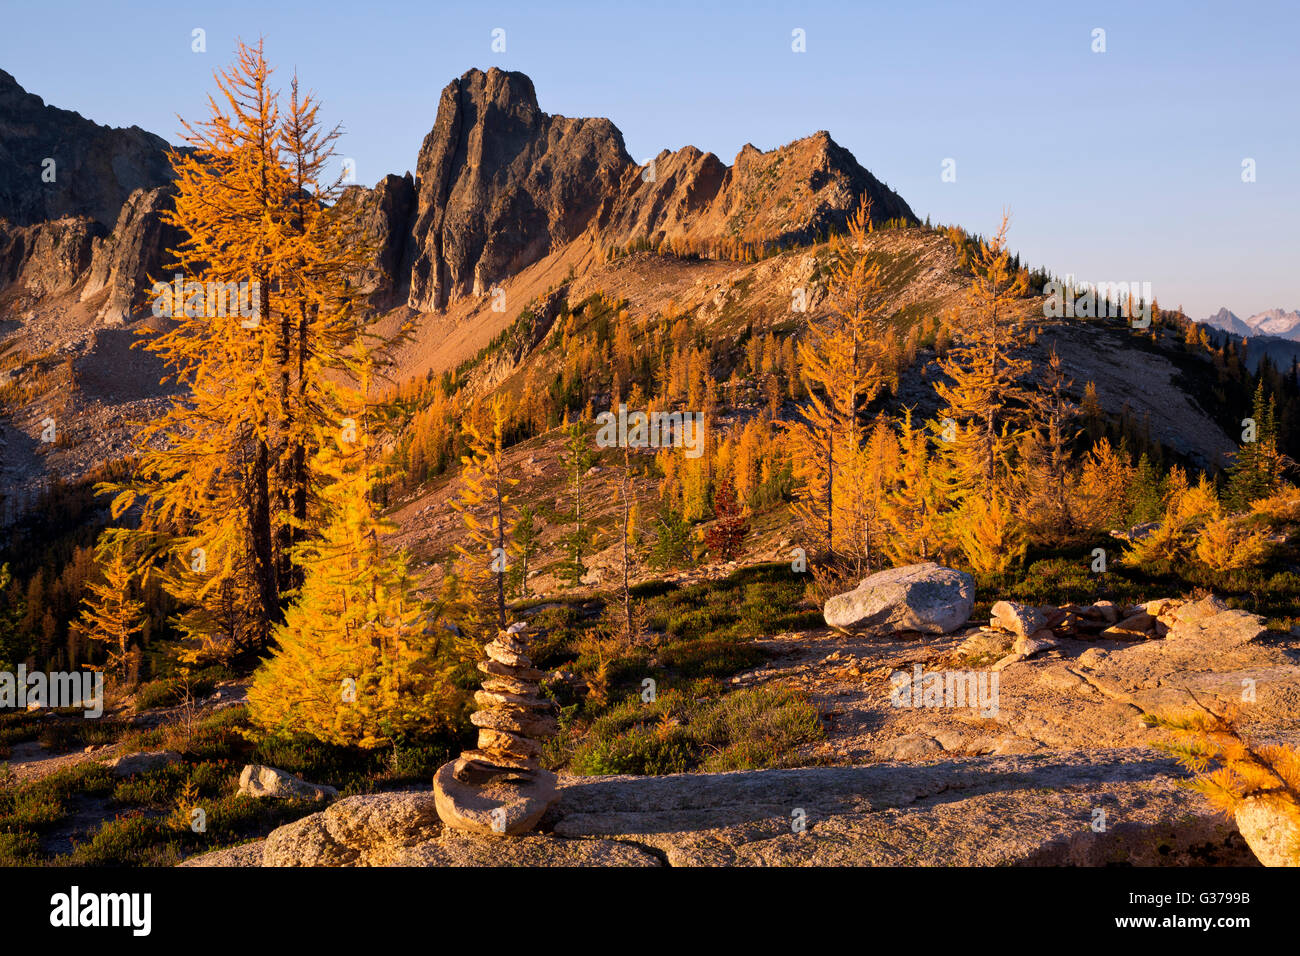 WASHINGTON - A cairn among the autumn colored larch trees at sunrise in the Cutthroat Pass area of the North Cascades. Stock Photo